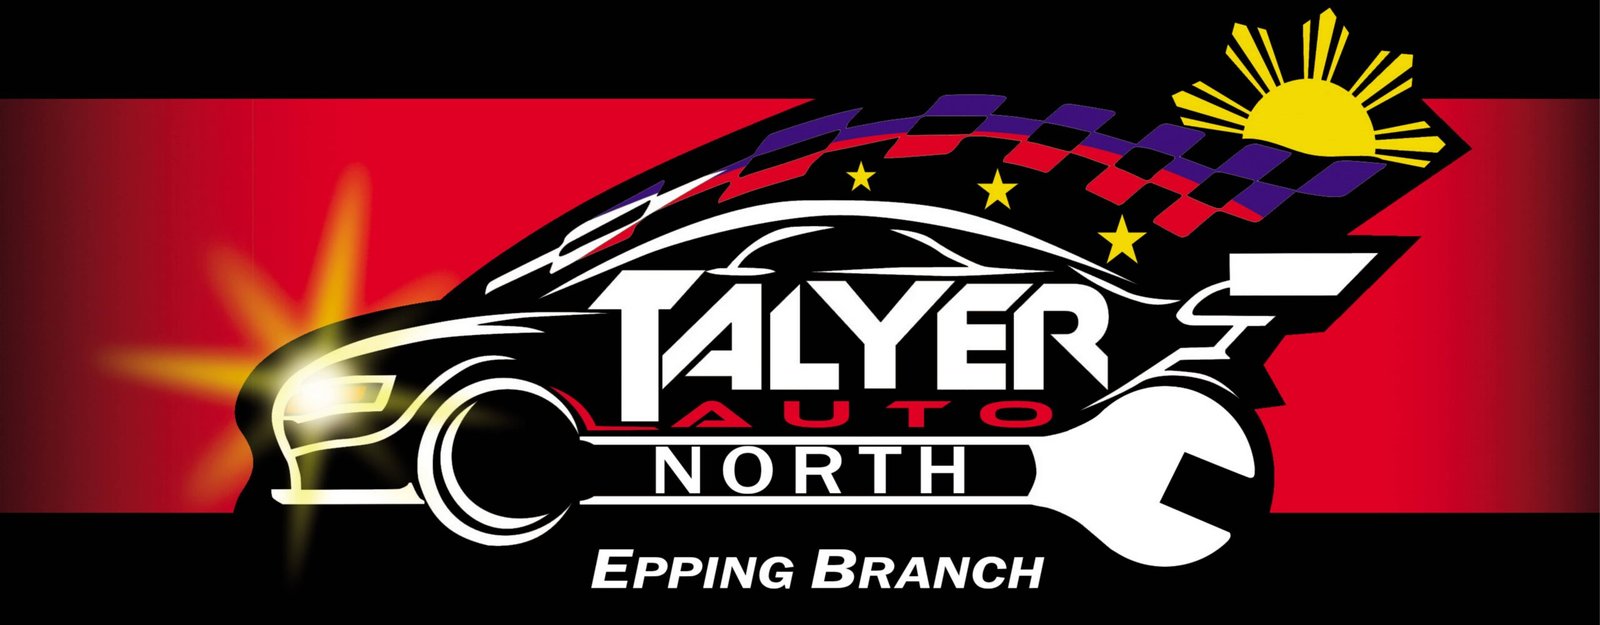 Tayler Auto Epping